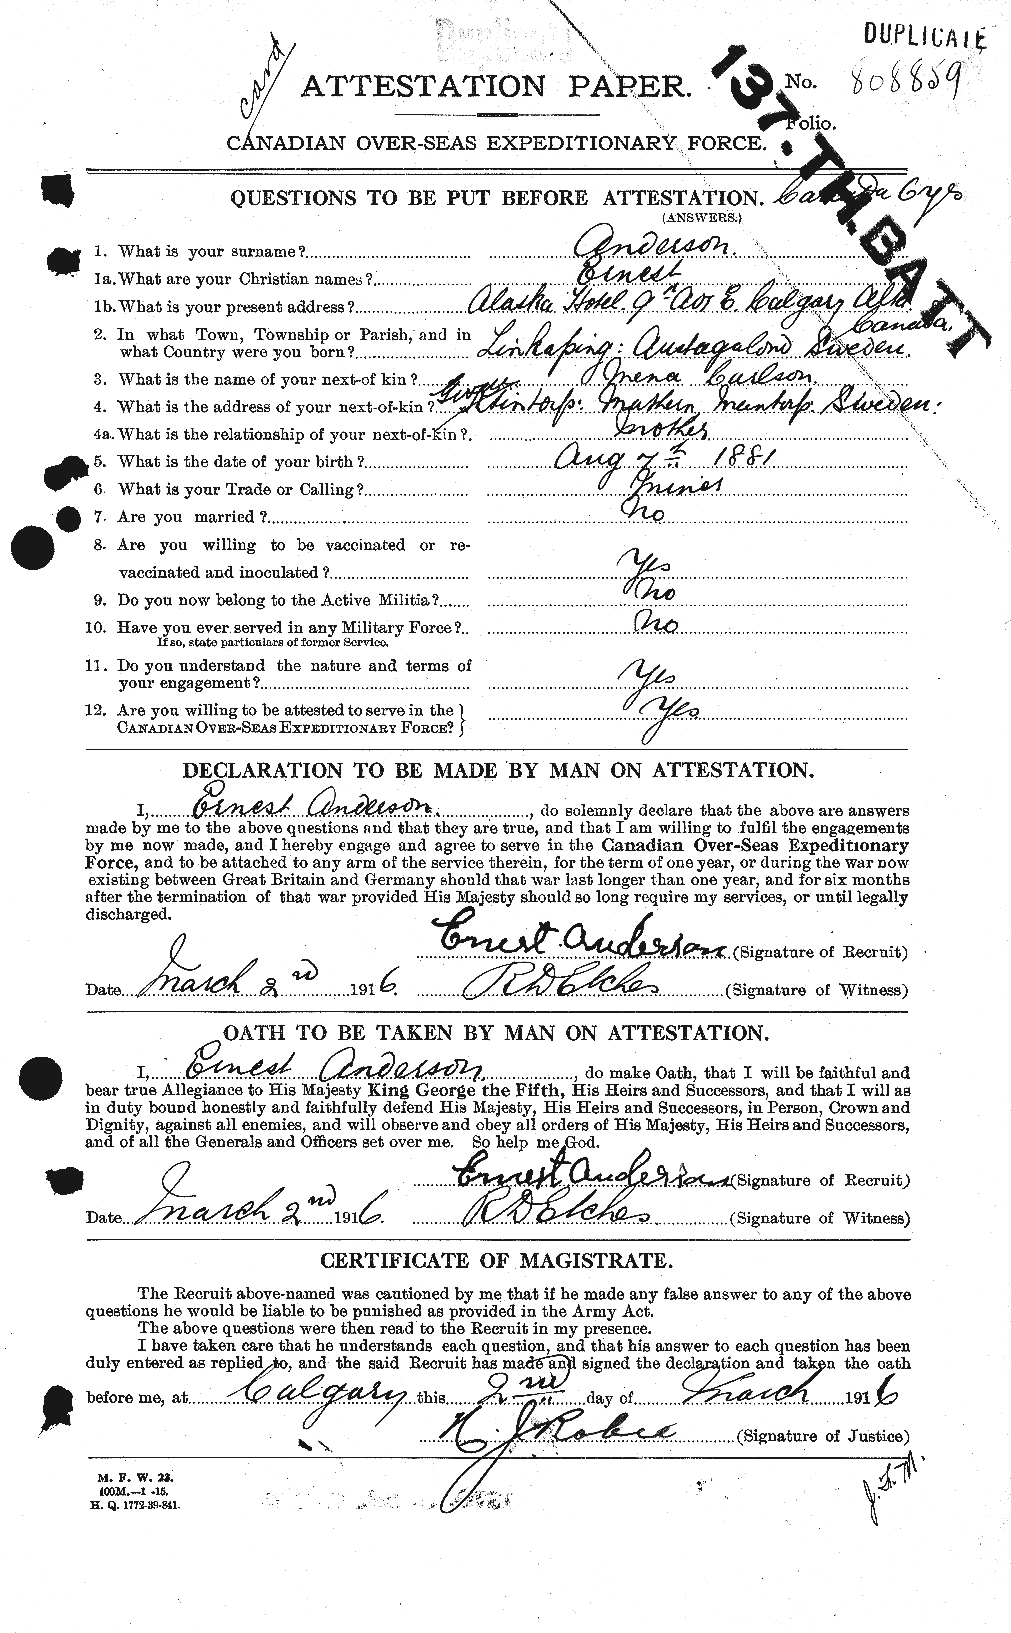 Personnel Records of the First World War - CEF 209890a